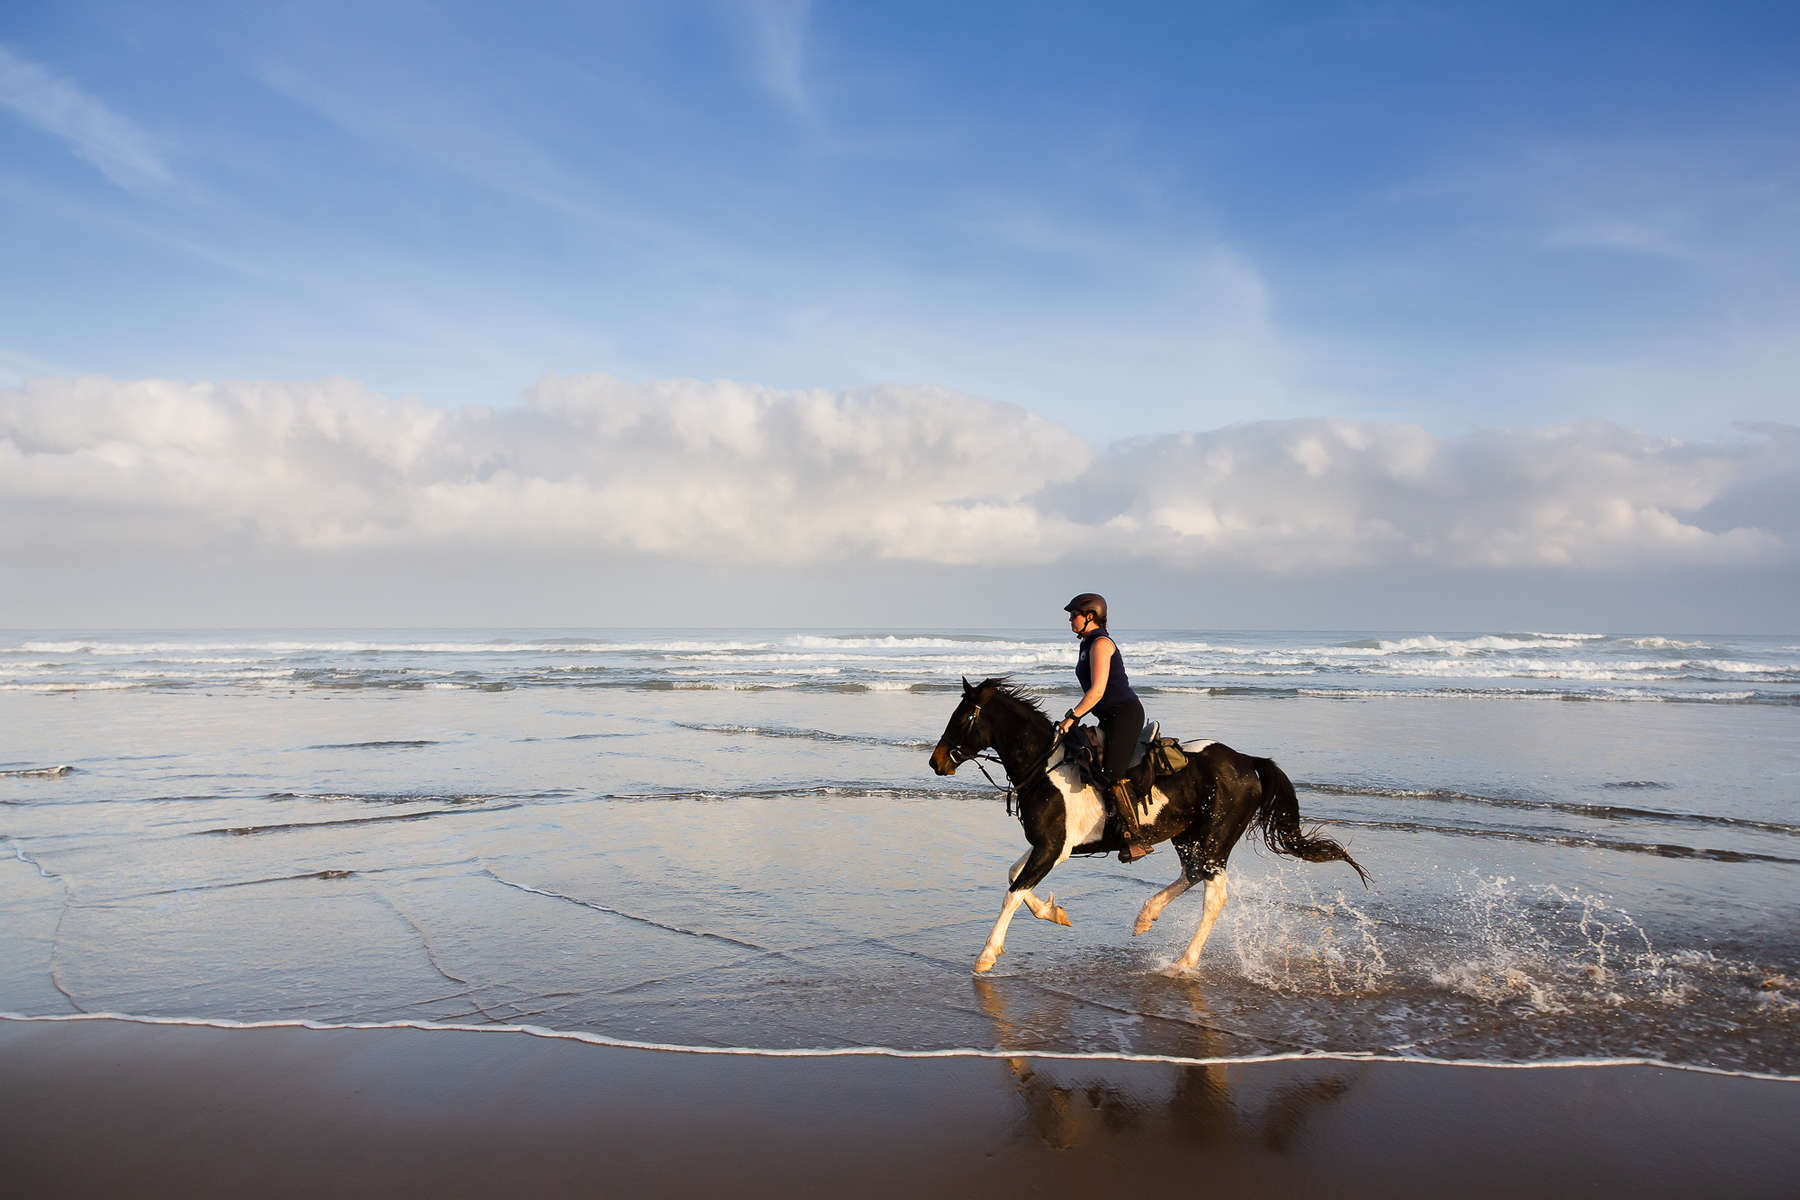 Riding cantering along the beach in South Africa